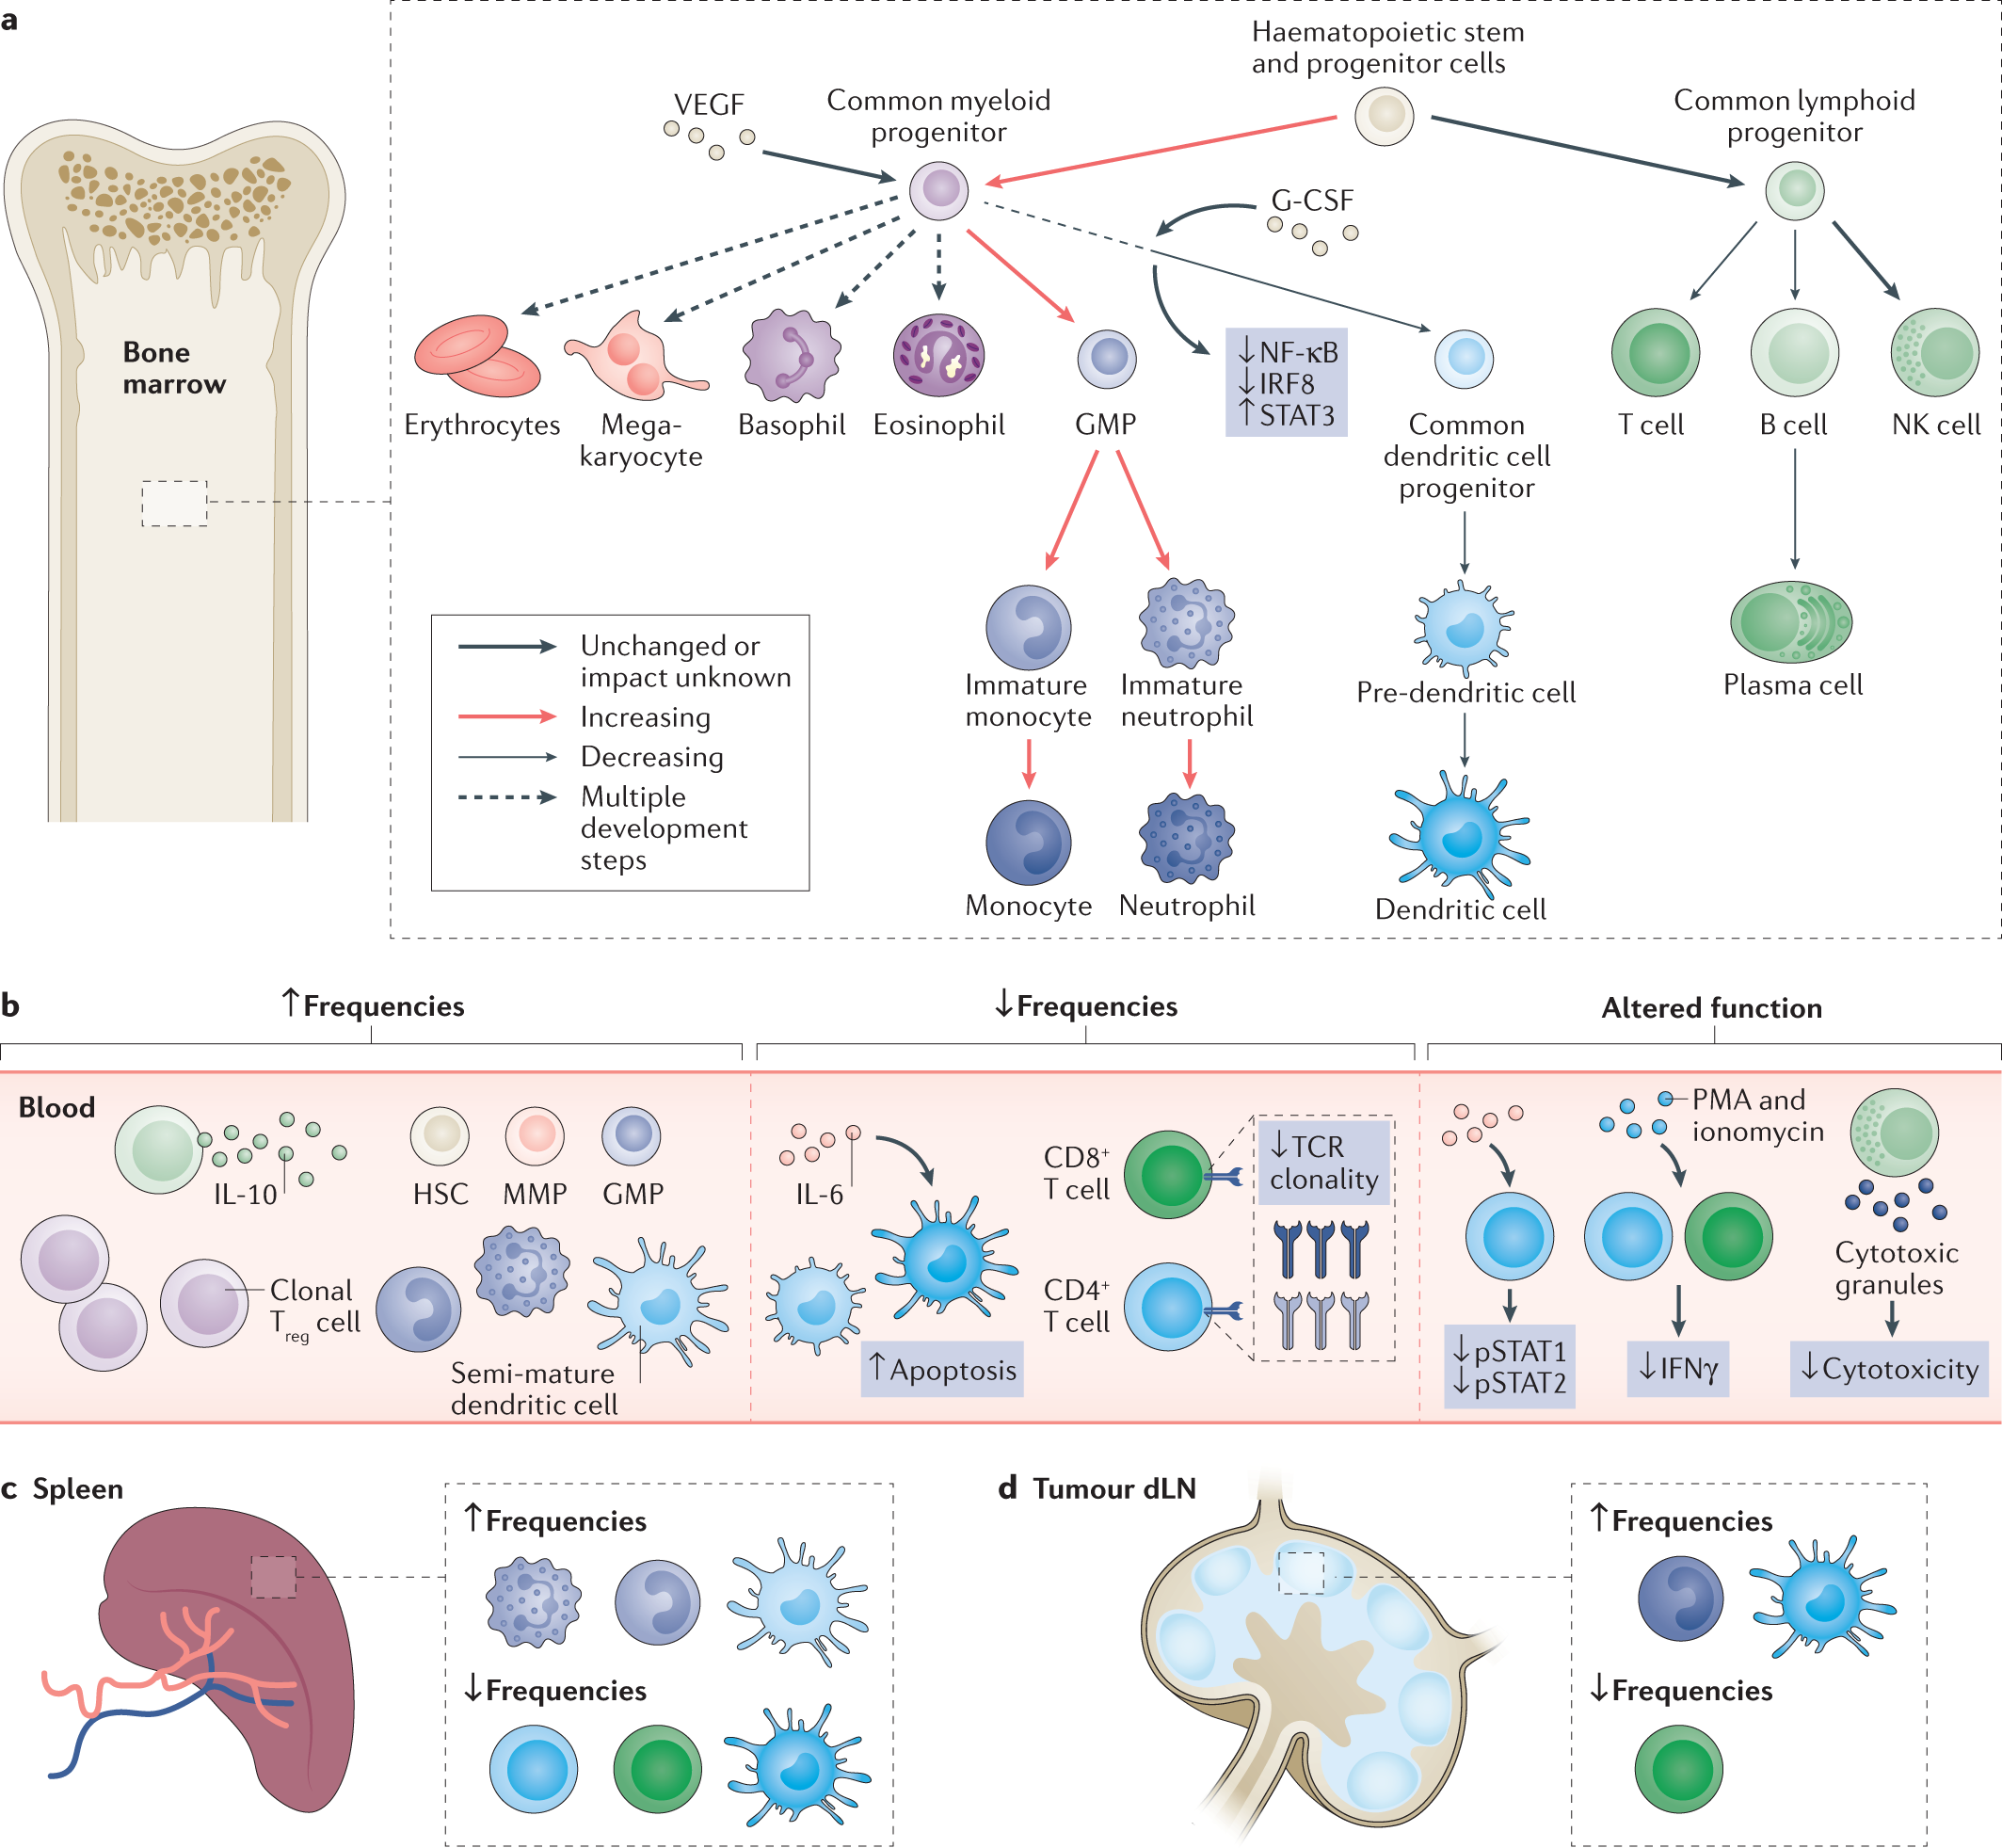 Systemic immunity in cancer | Nature Reviews